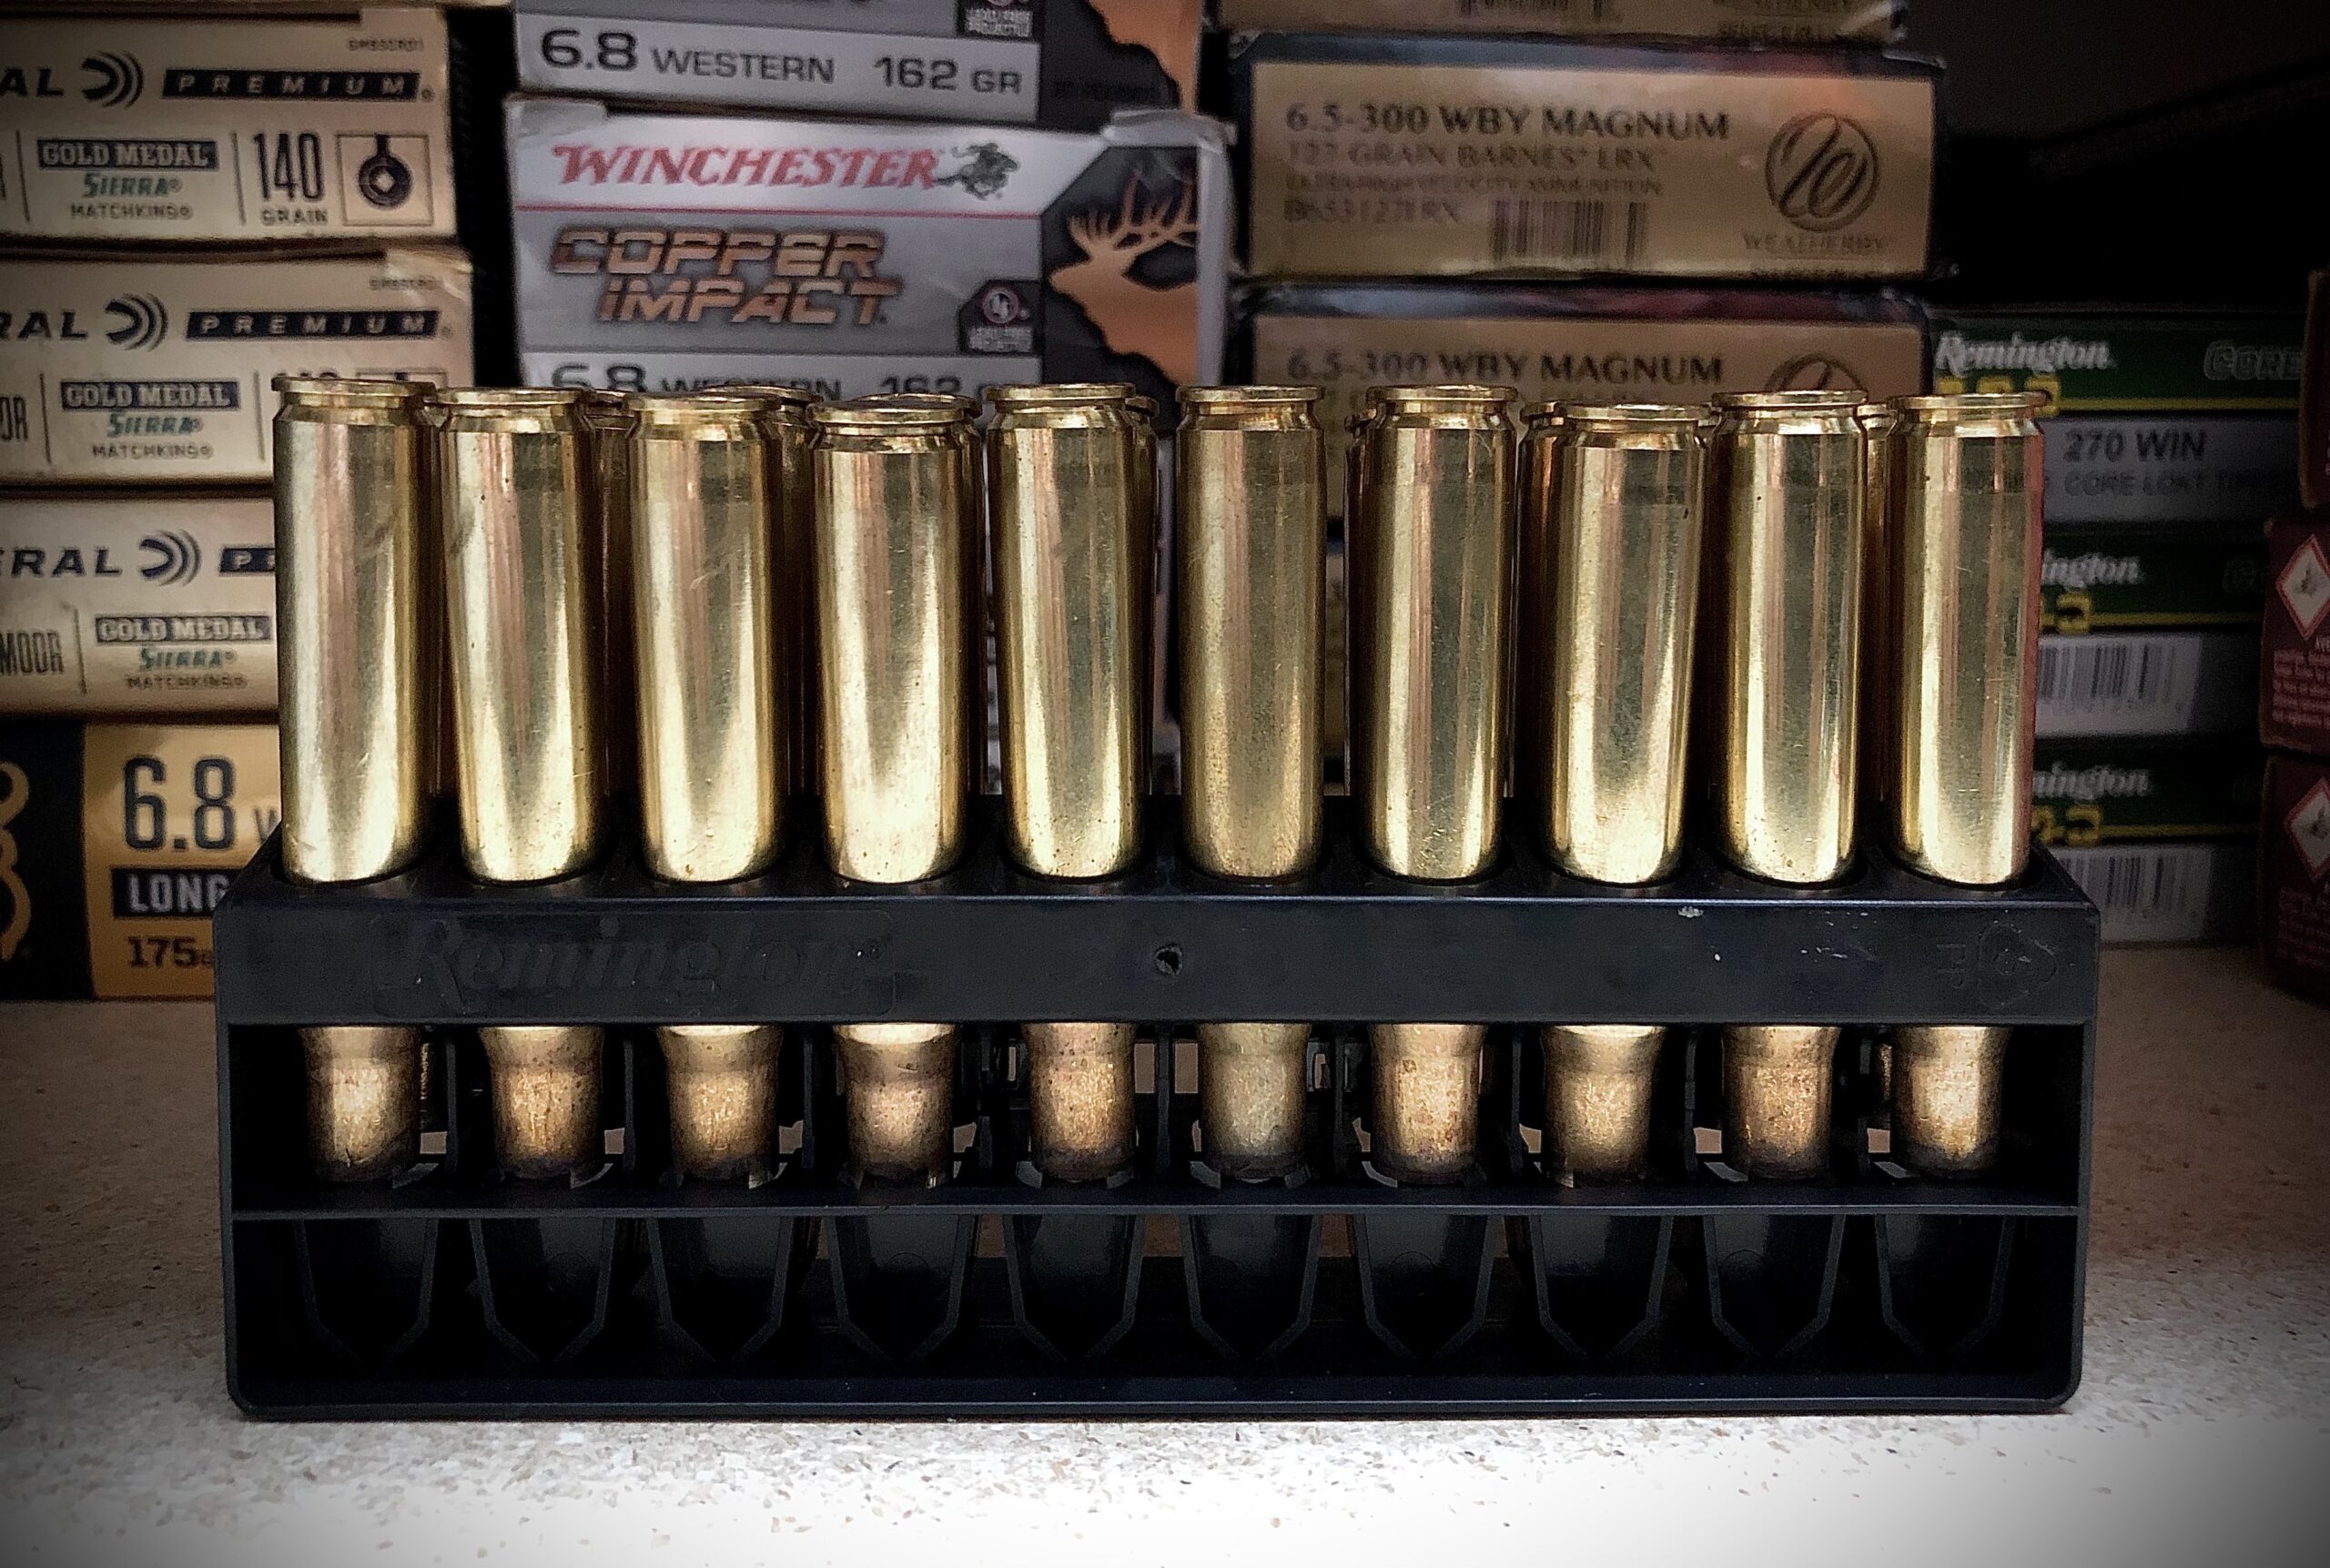 Ammo Buyer Beware: Don’t Fall for These Scam Websites That Claim to Sell Ammunition